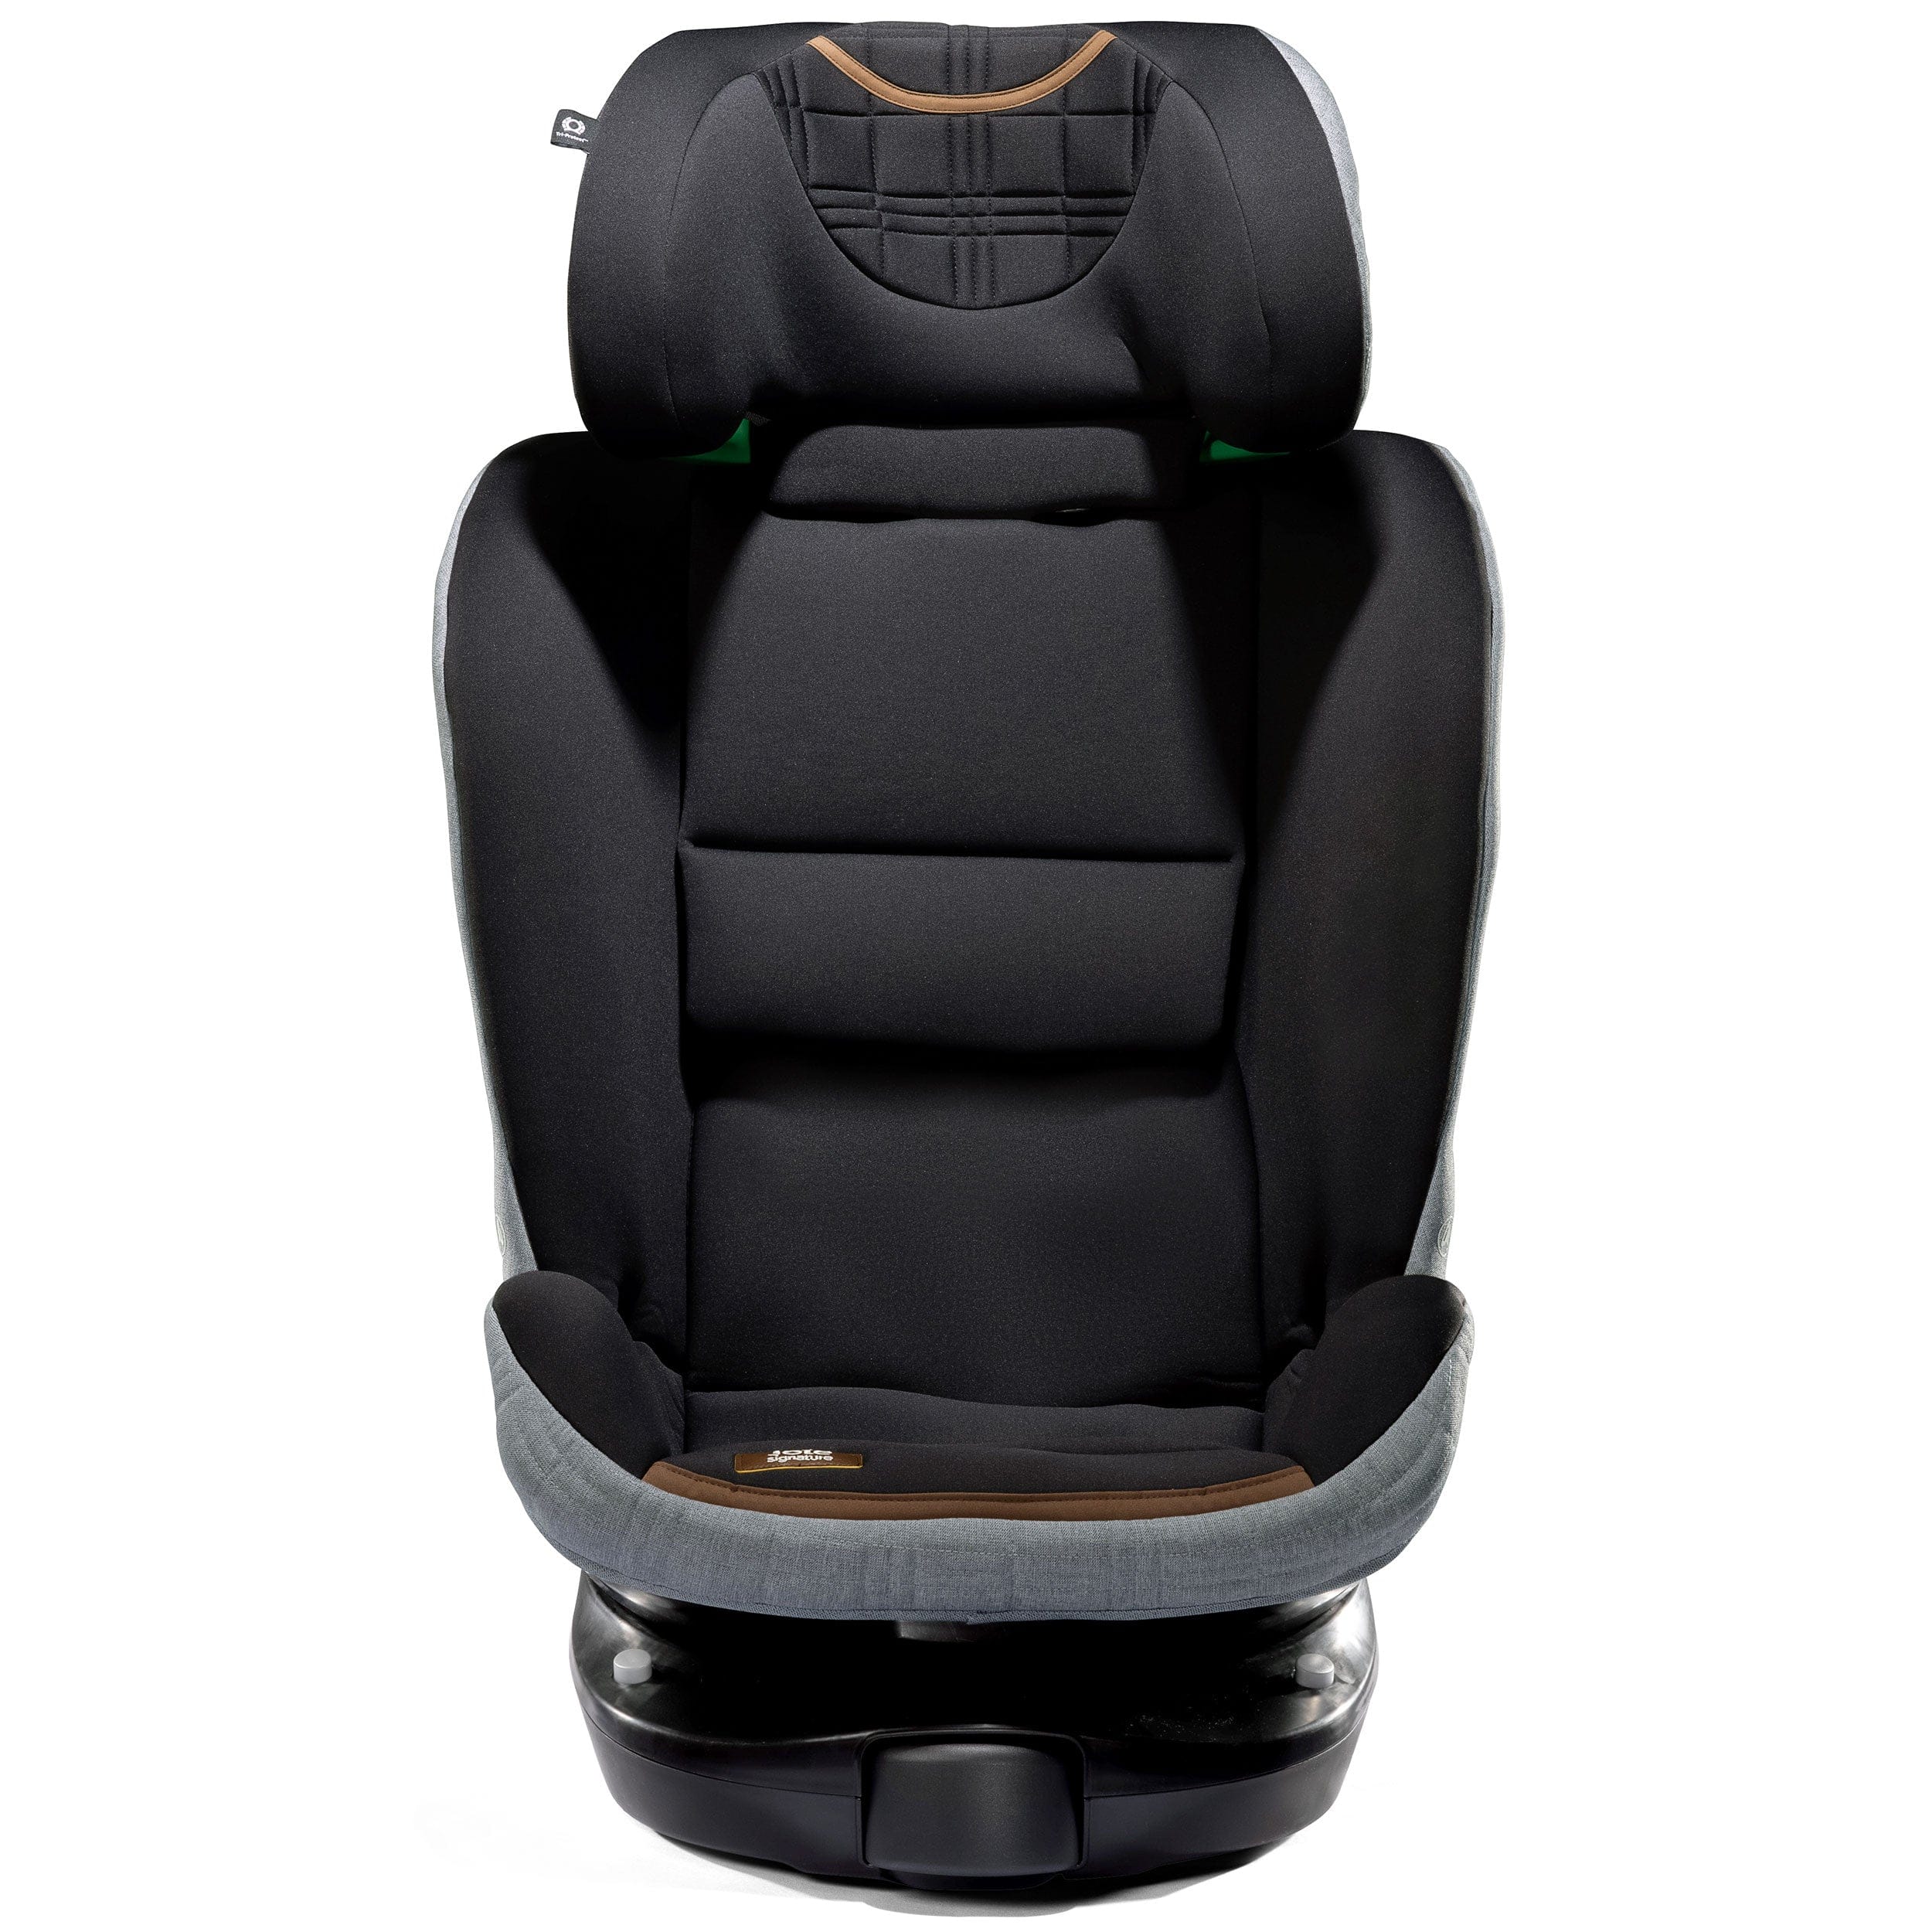 Joie combination car seats Joie i-Spin XL - Carbon C2205AACBN000